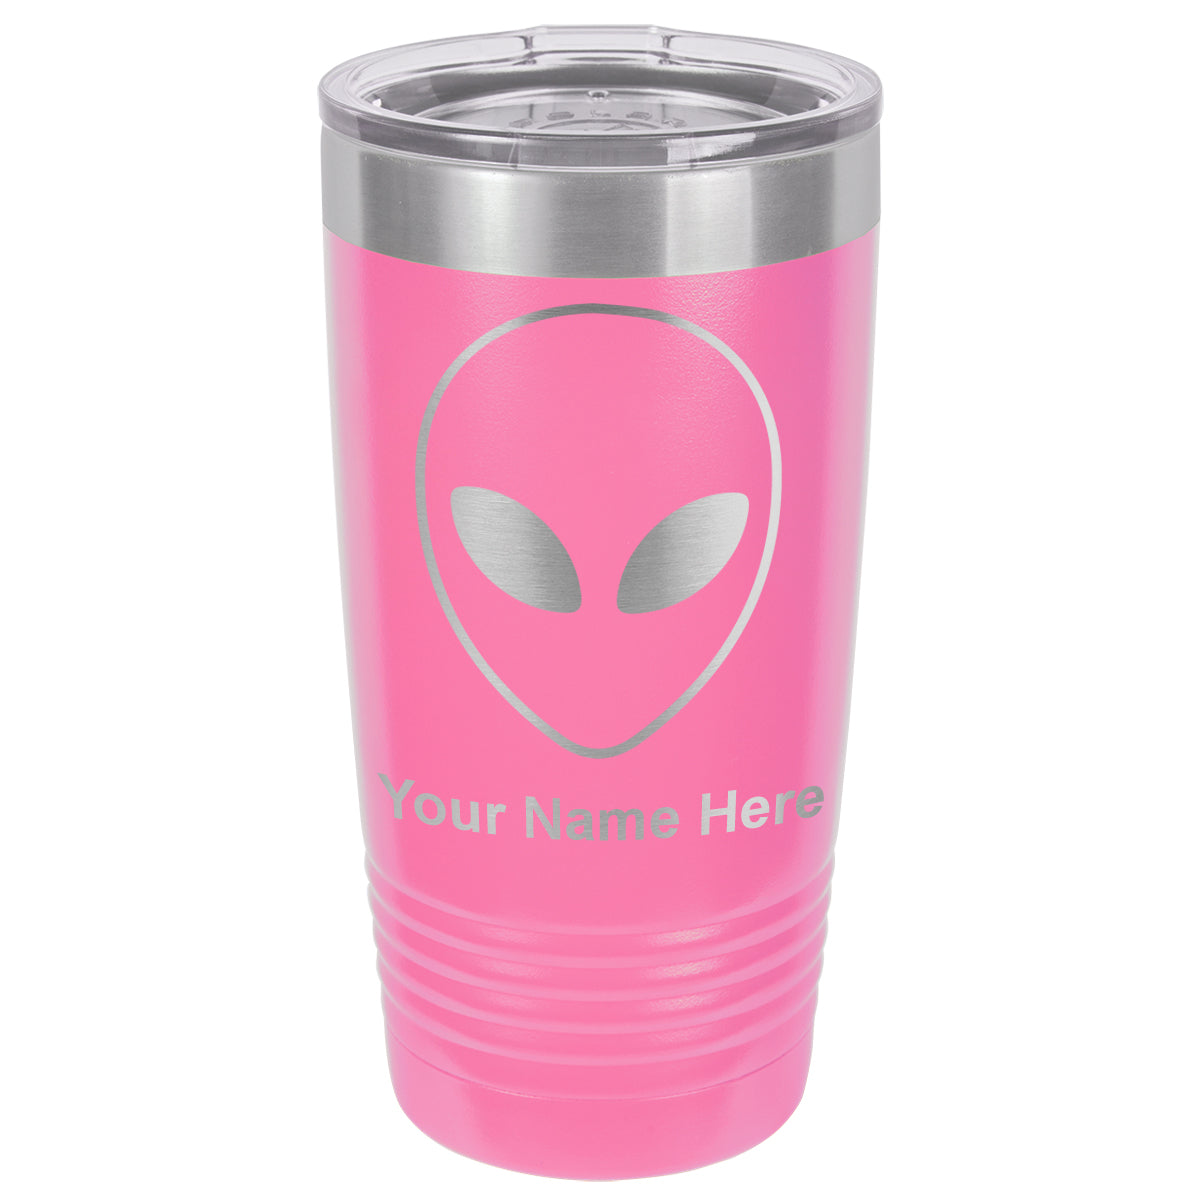 20oz Vacuum Insulated Tumbler Mug, Alien Head, Personalized Engraving Included